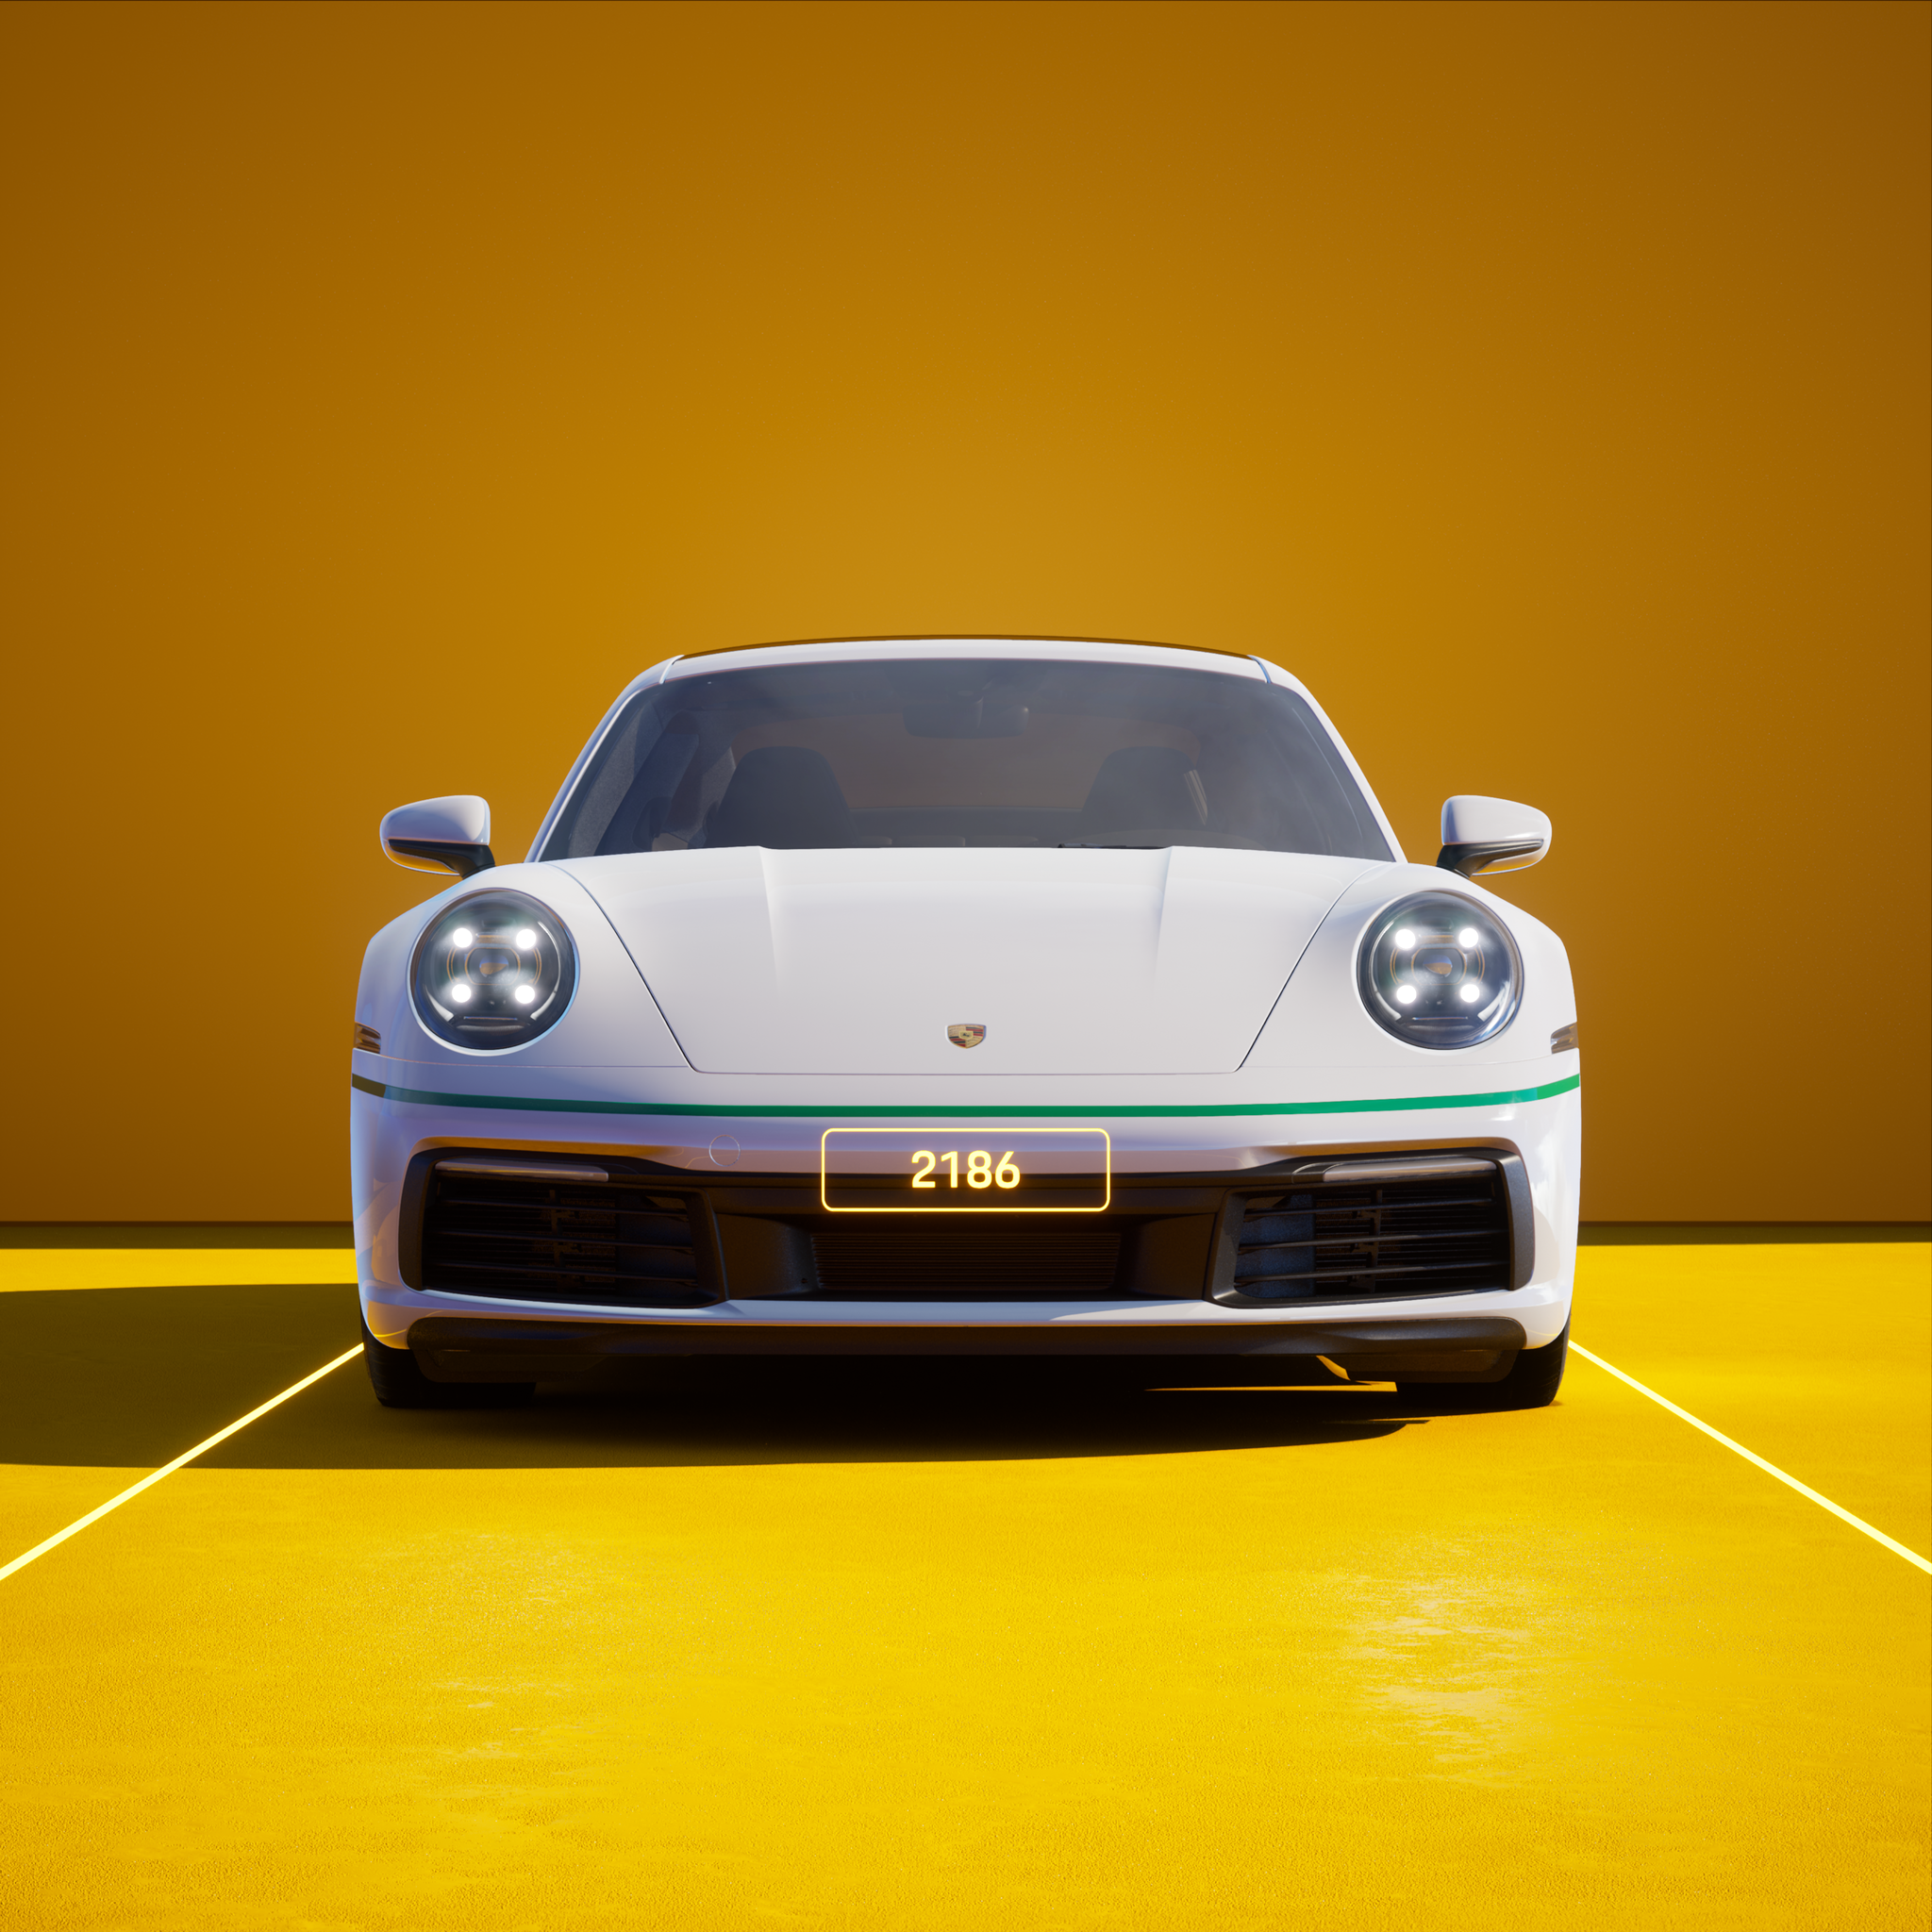 The PORSCHΞ 911 2186 image in phase